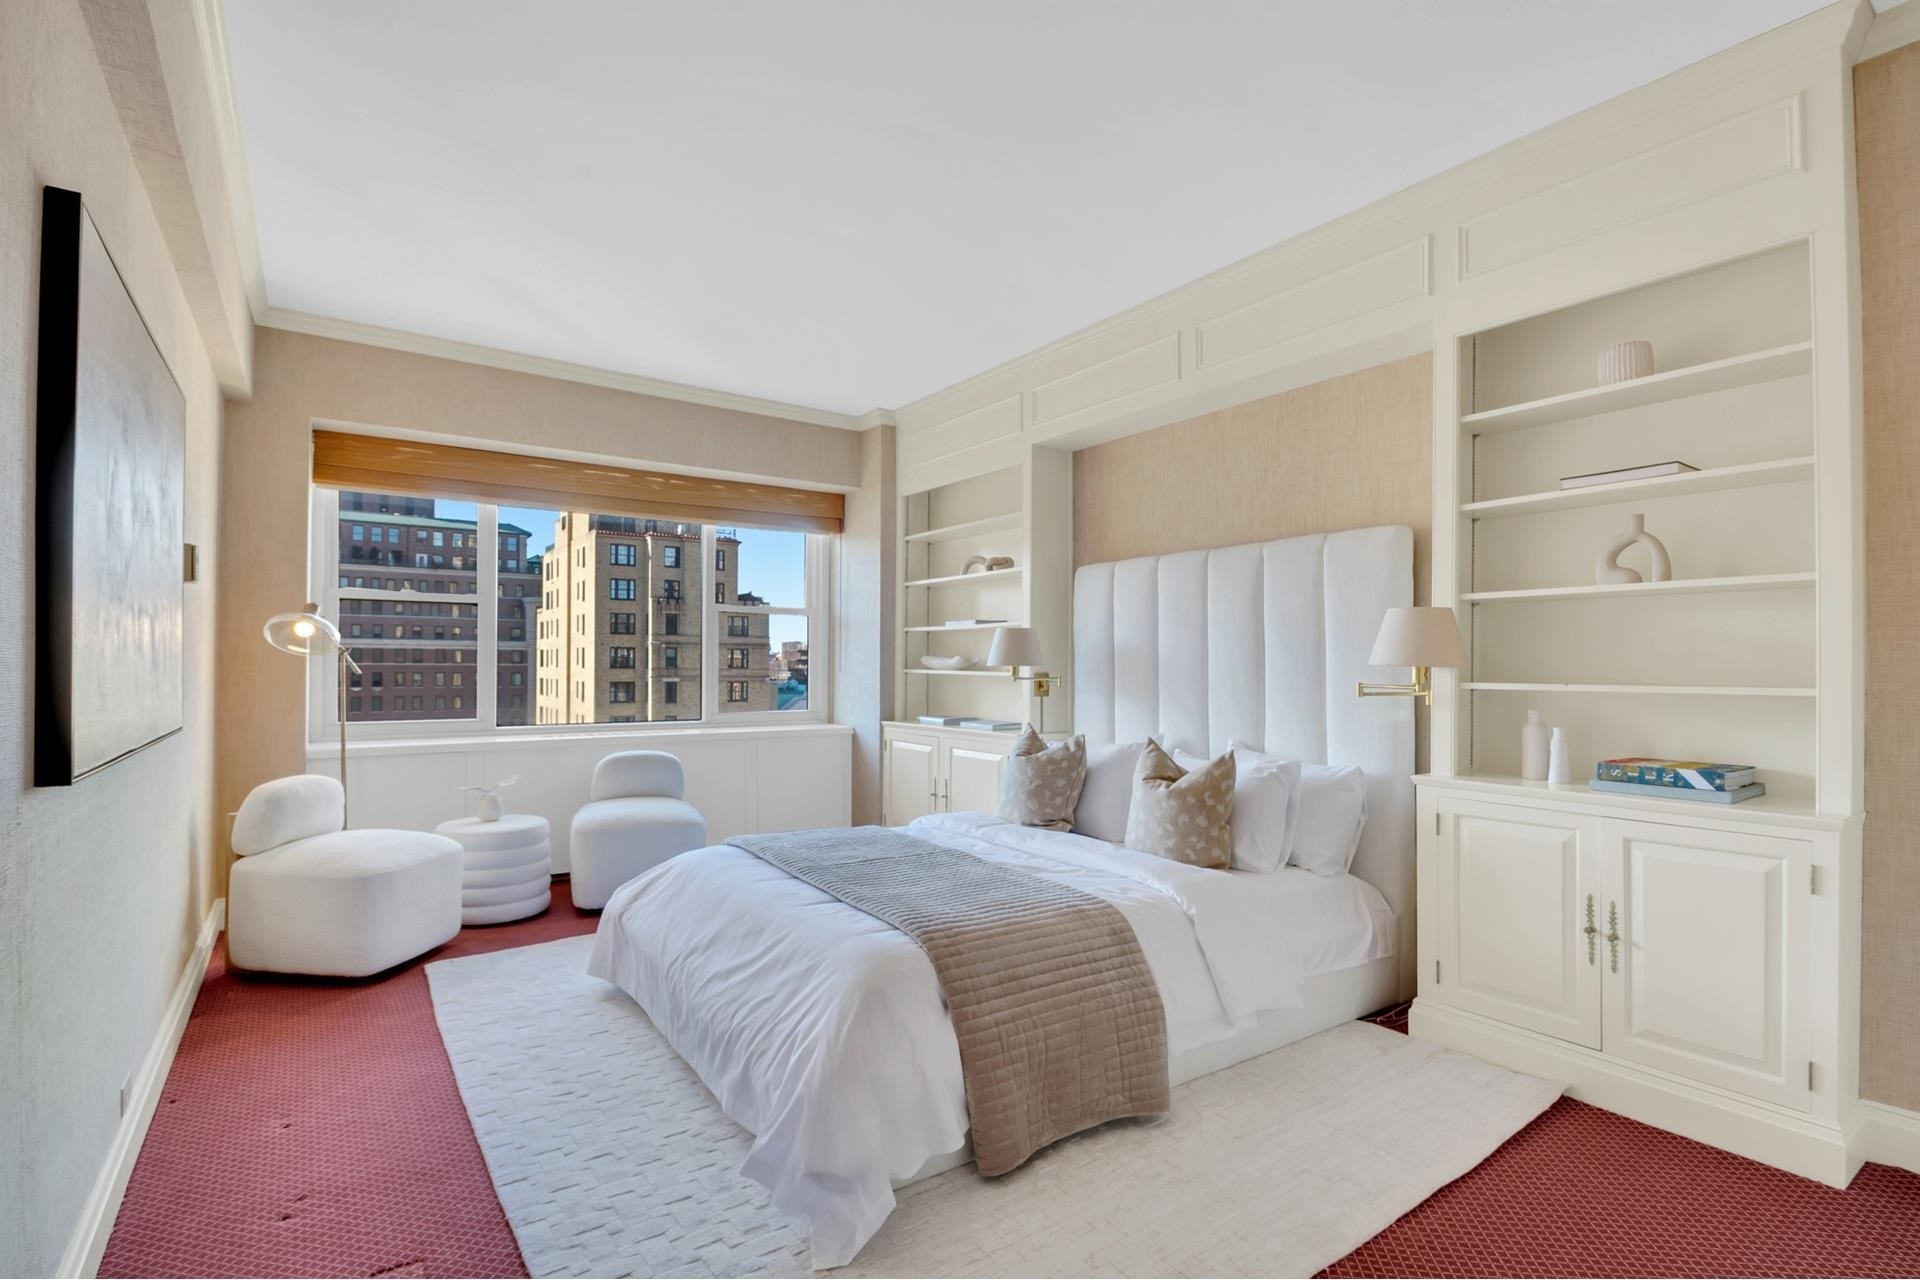 9. Co-op Properties for Sale at 700 PARK AVE, 14A Lenox Hill, New York, New York 10021